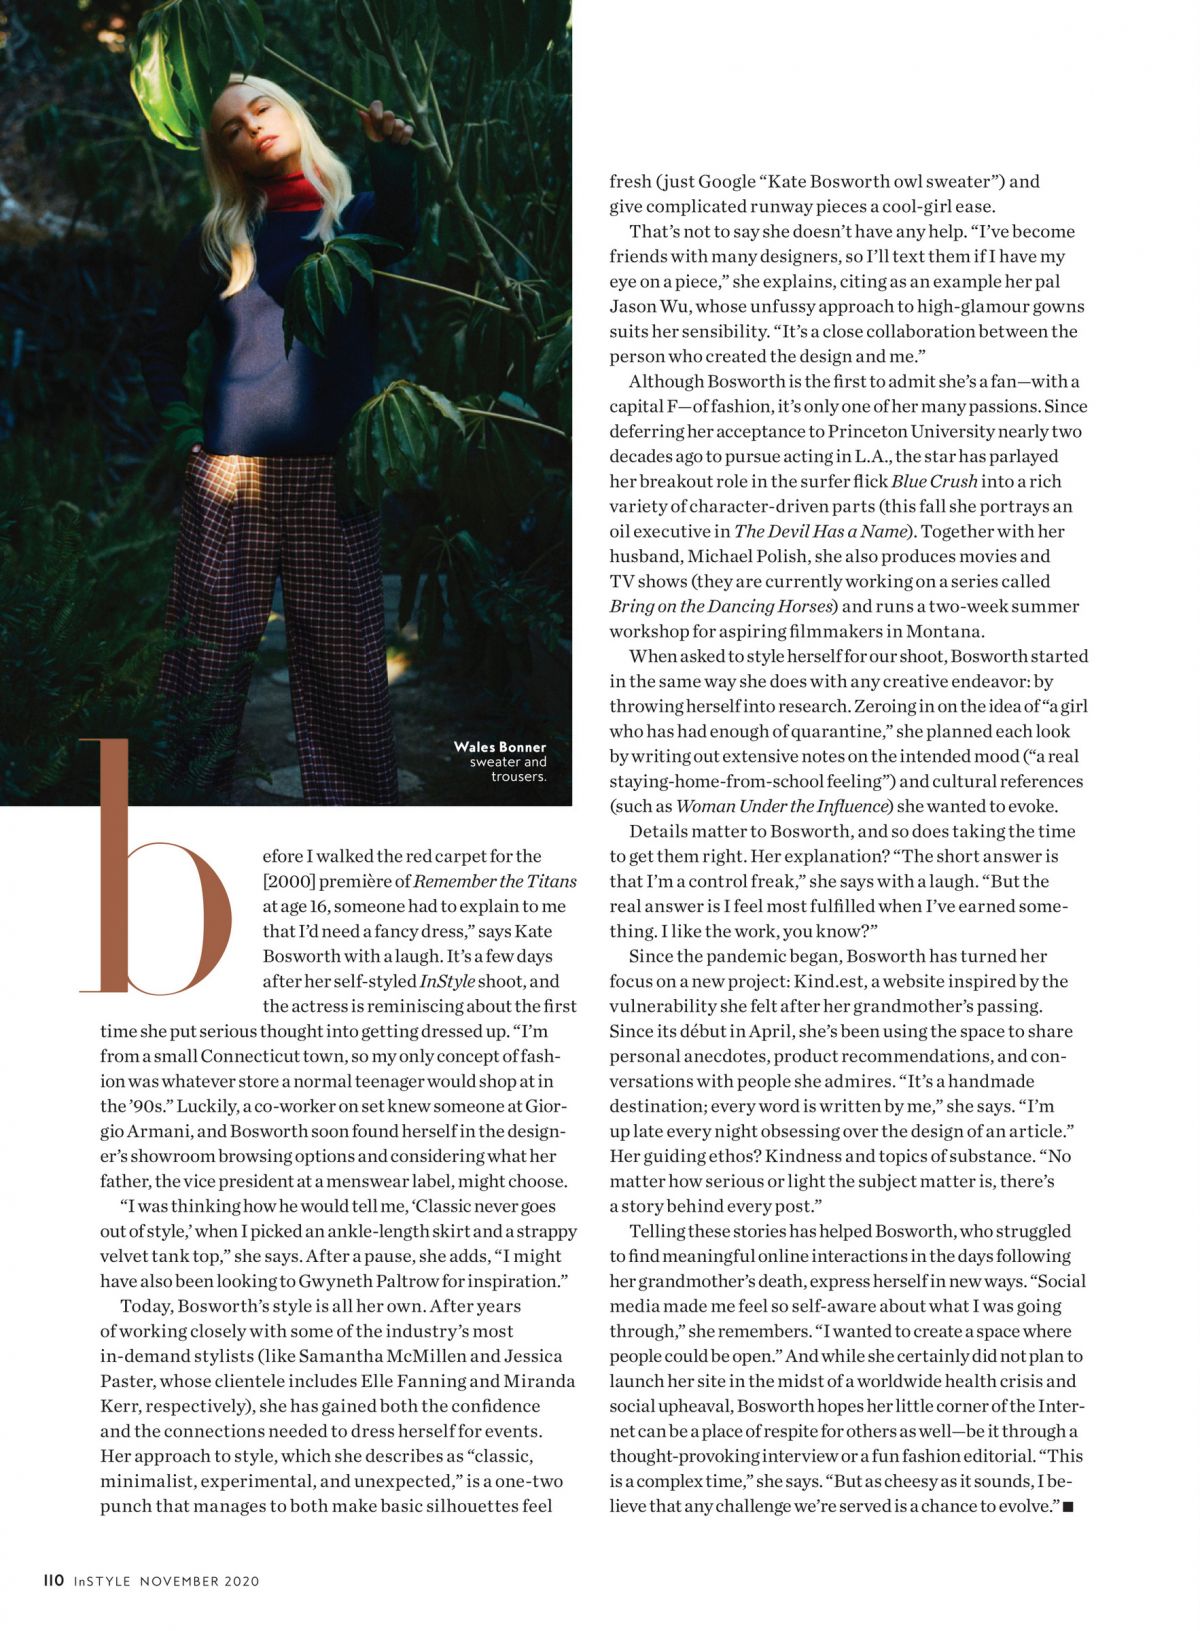 Kate Bosworth in Instyle Magazine, November 2020 Issue